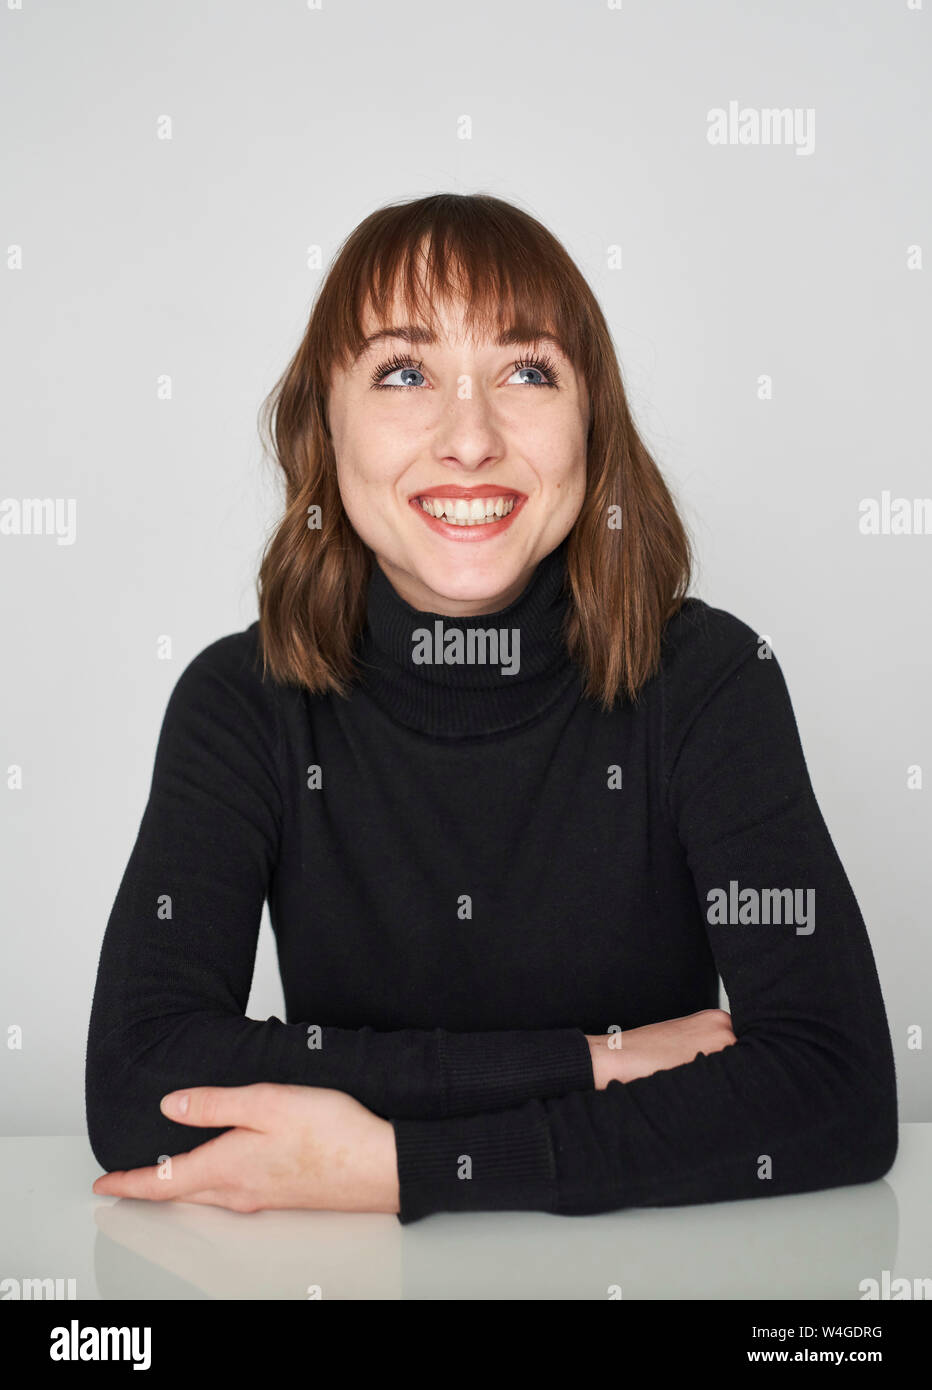 Portrait of smiling young woman wearing black turtleneck pullover looking up Stock Photo